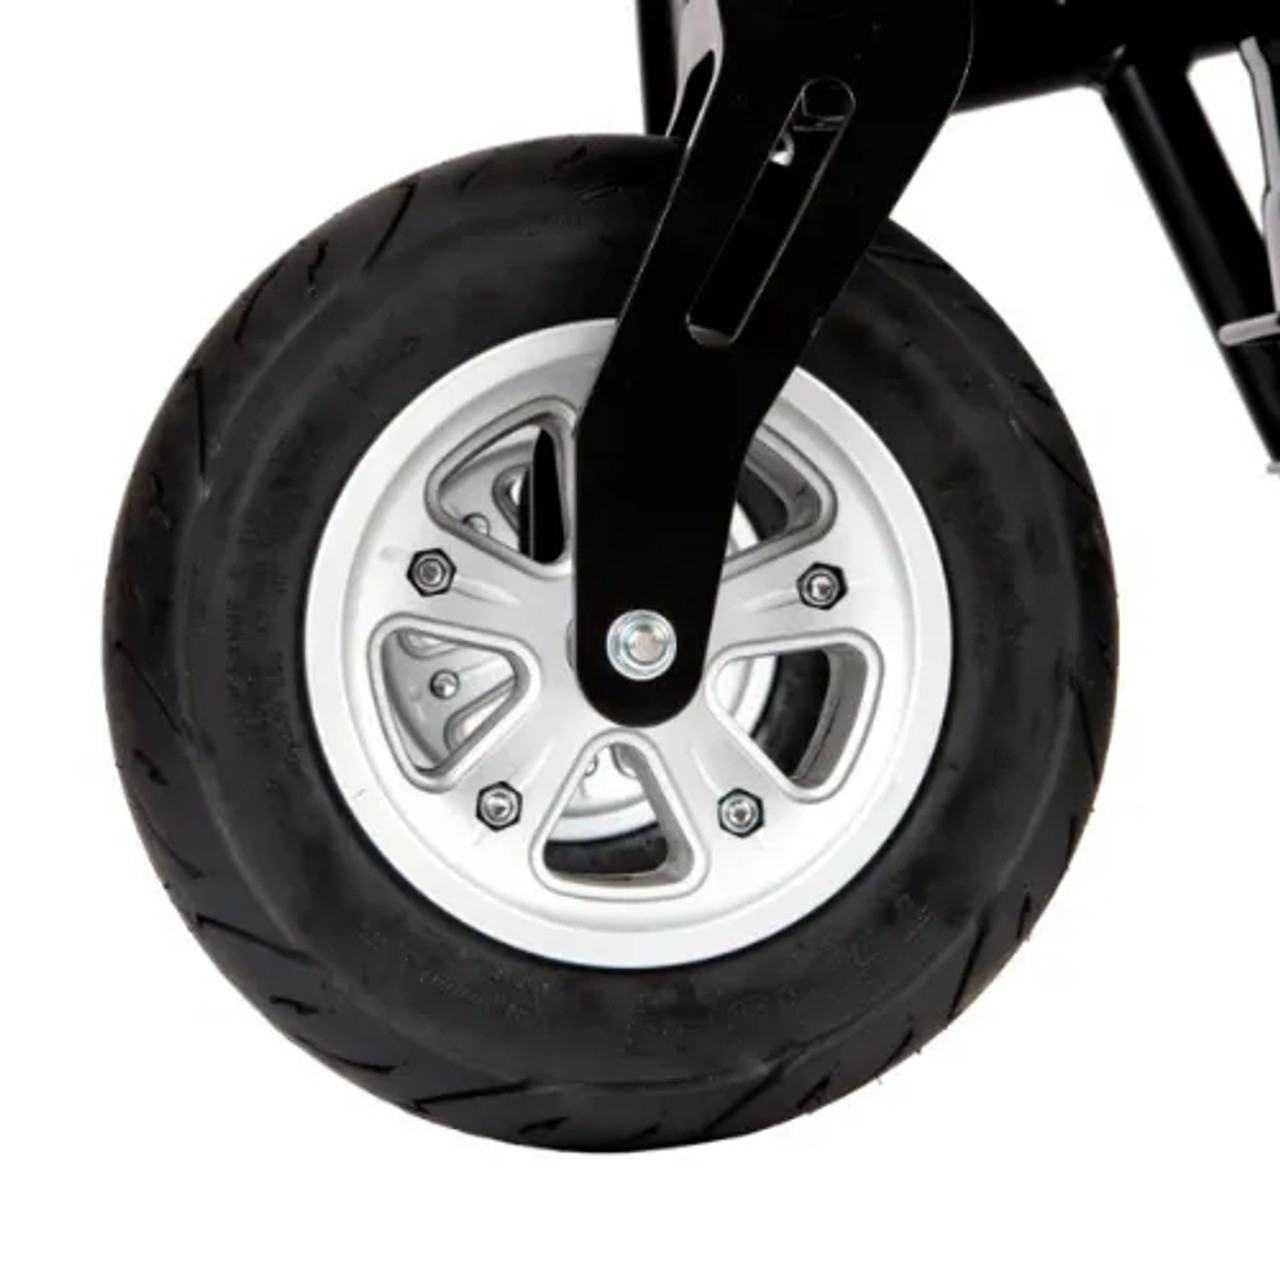 Trident HD Front-Wheel Drive Power Wheelchair - Comfortable, Ultra-Strong-Chicken Pieces